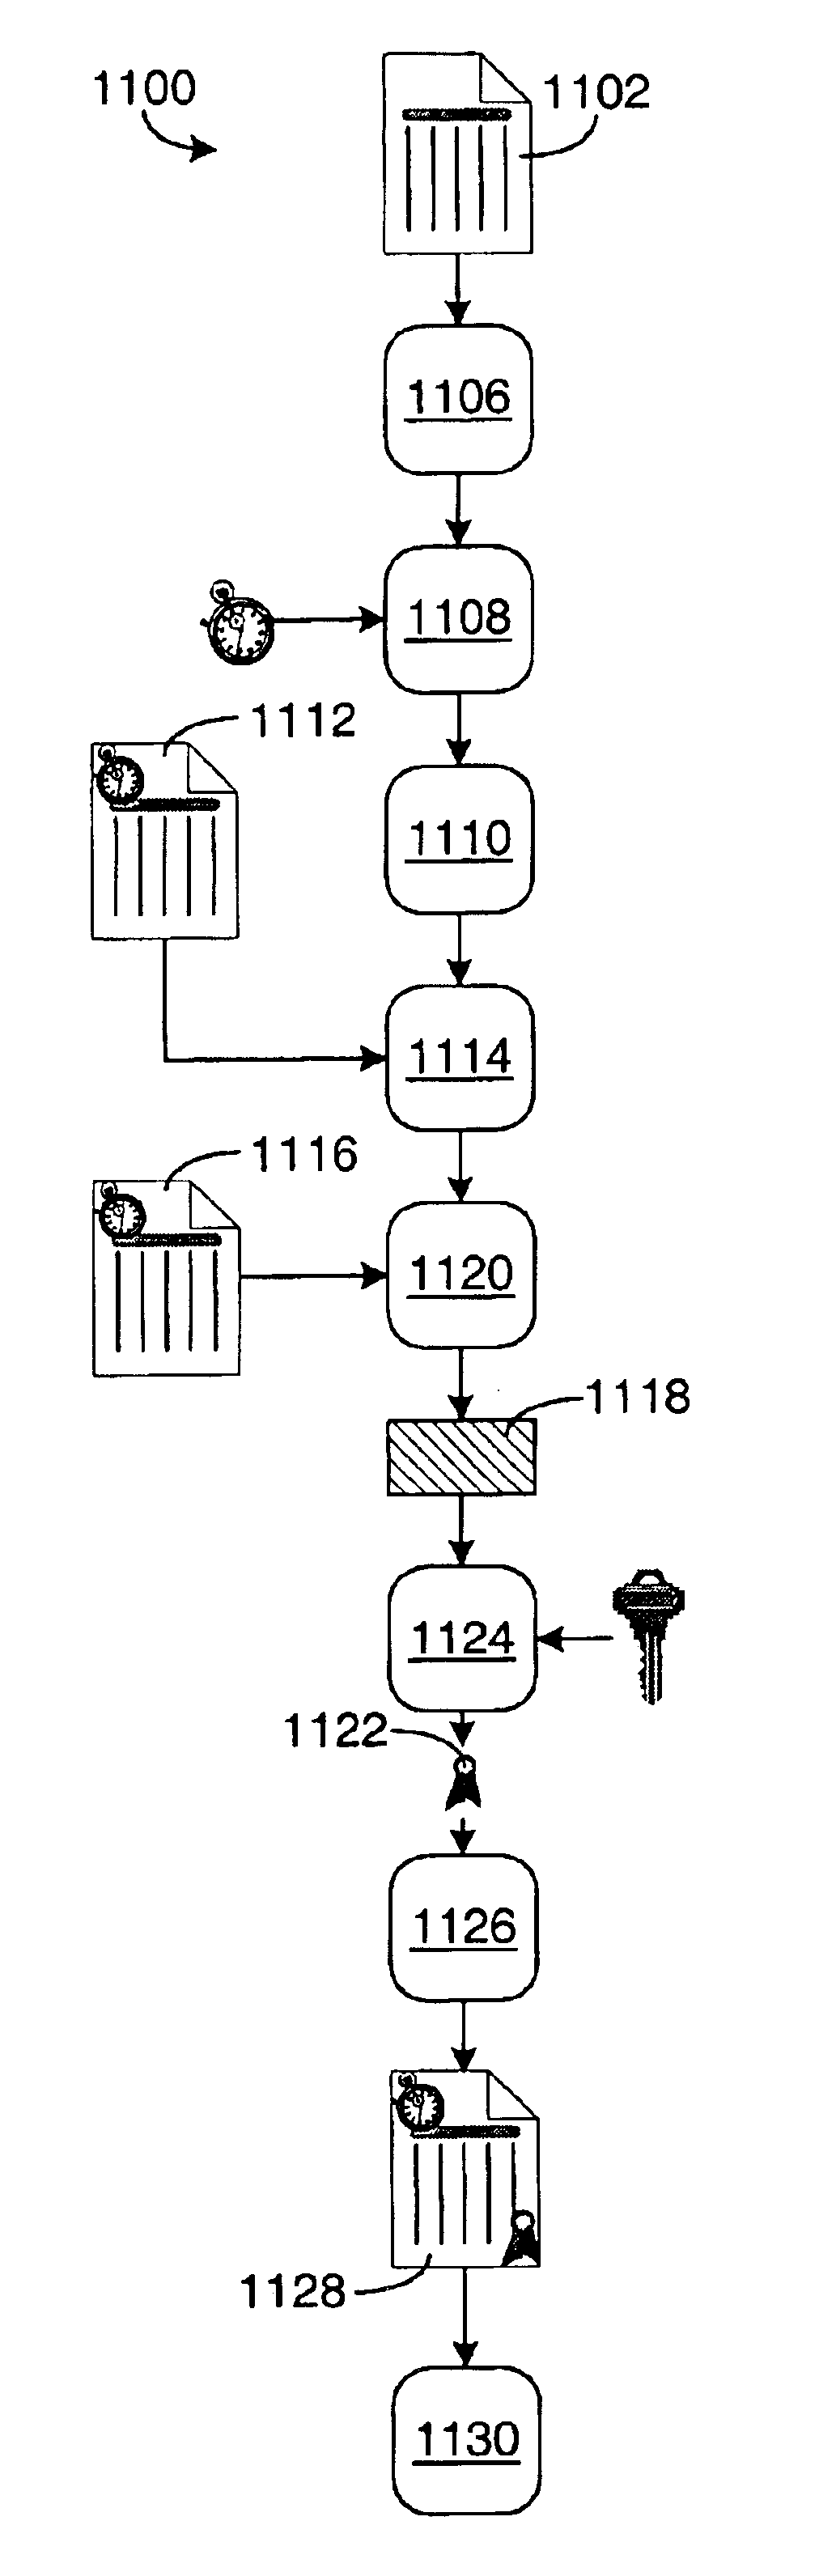 Personal computer system and methods for proving dates in digital data files